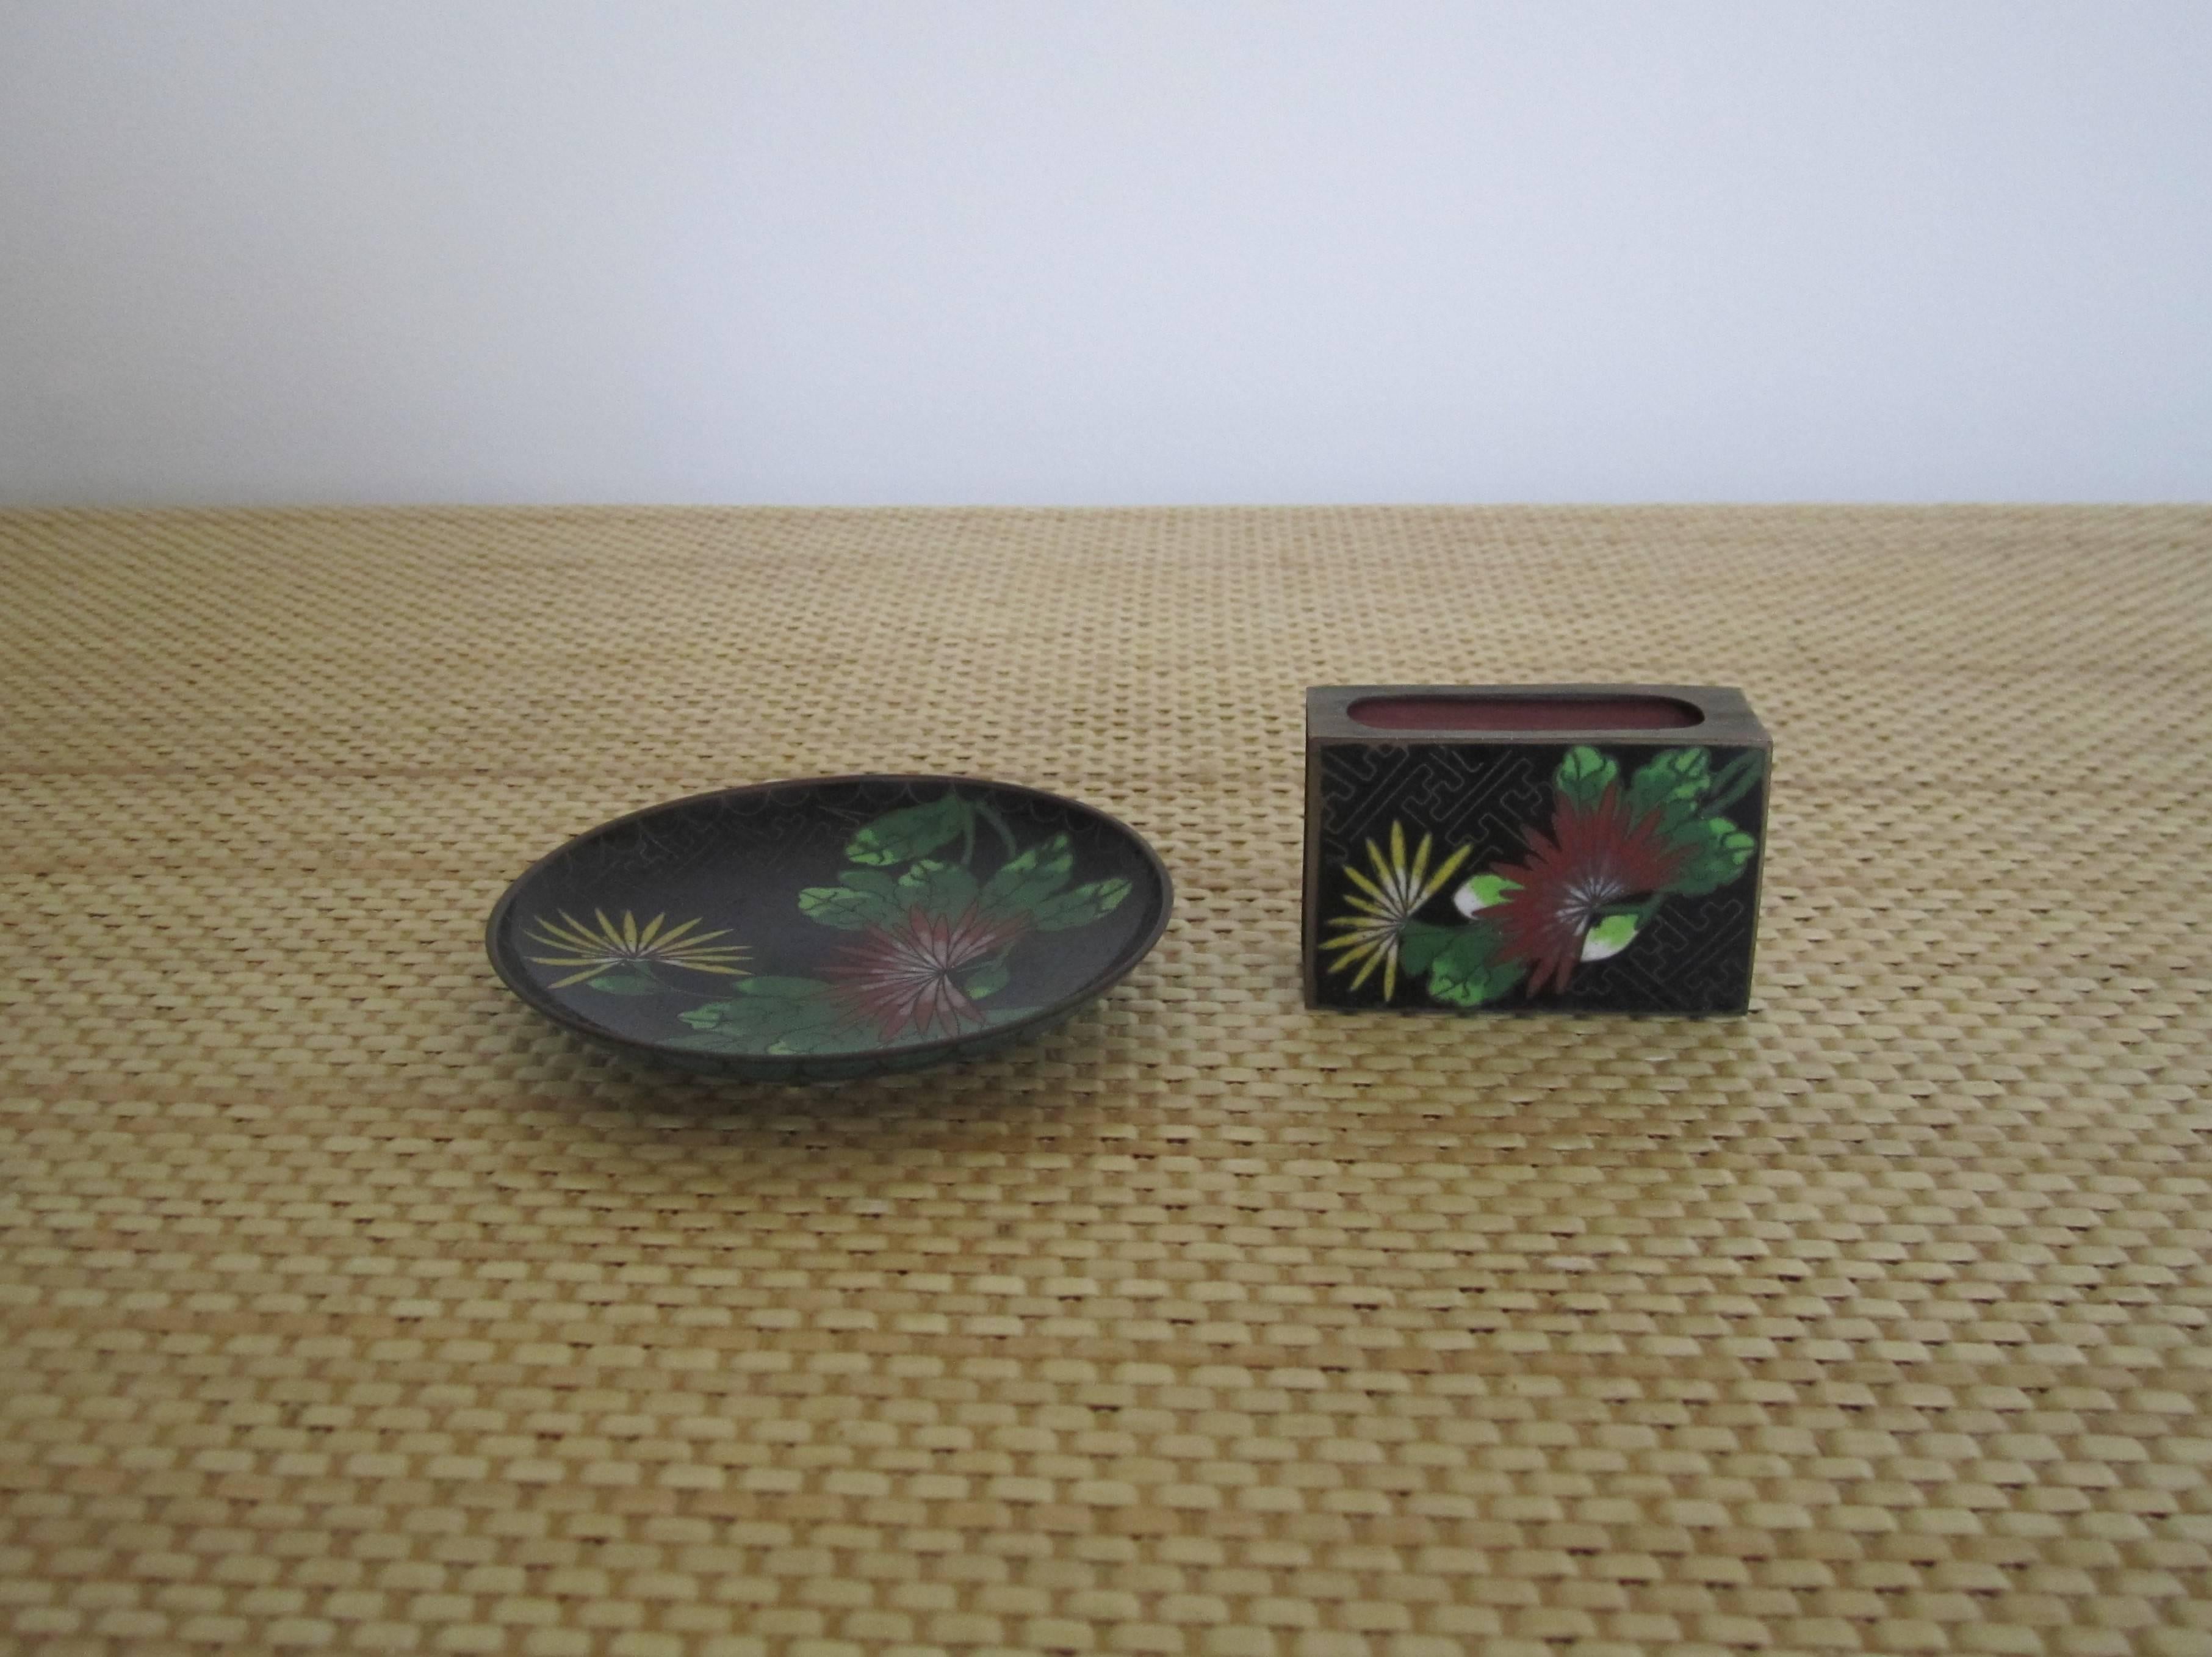 Match Box Case and Dish Set in Cloisonné Enamel In Good Condition For Sale In New York, NY